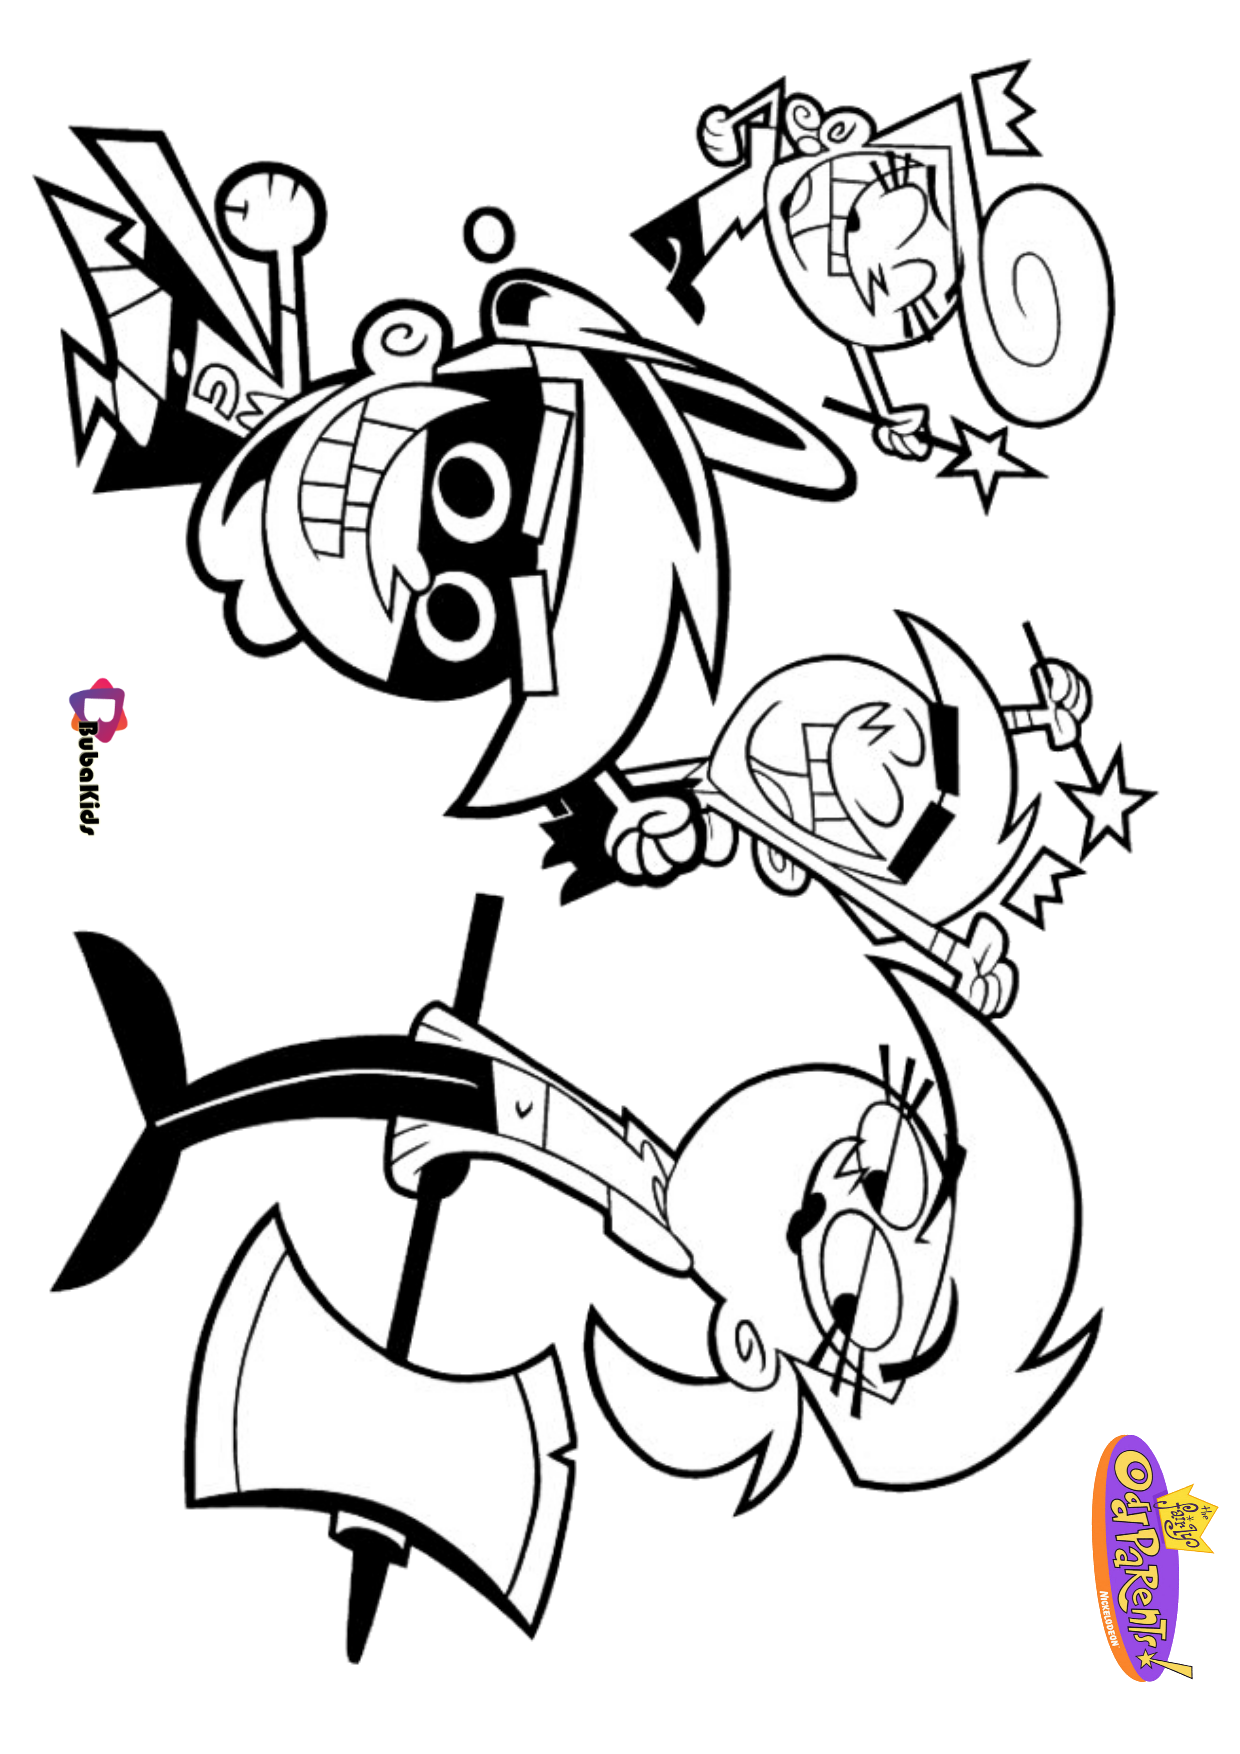 The fairly oddparents nick jr cartoon tv series coloring page Wallpaper